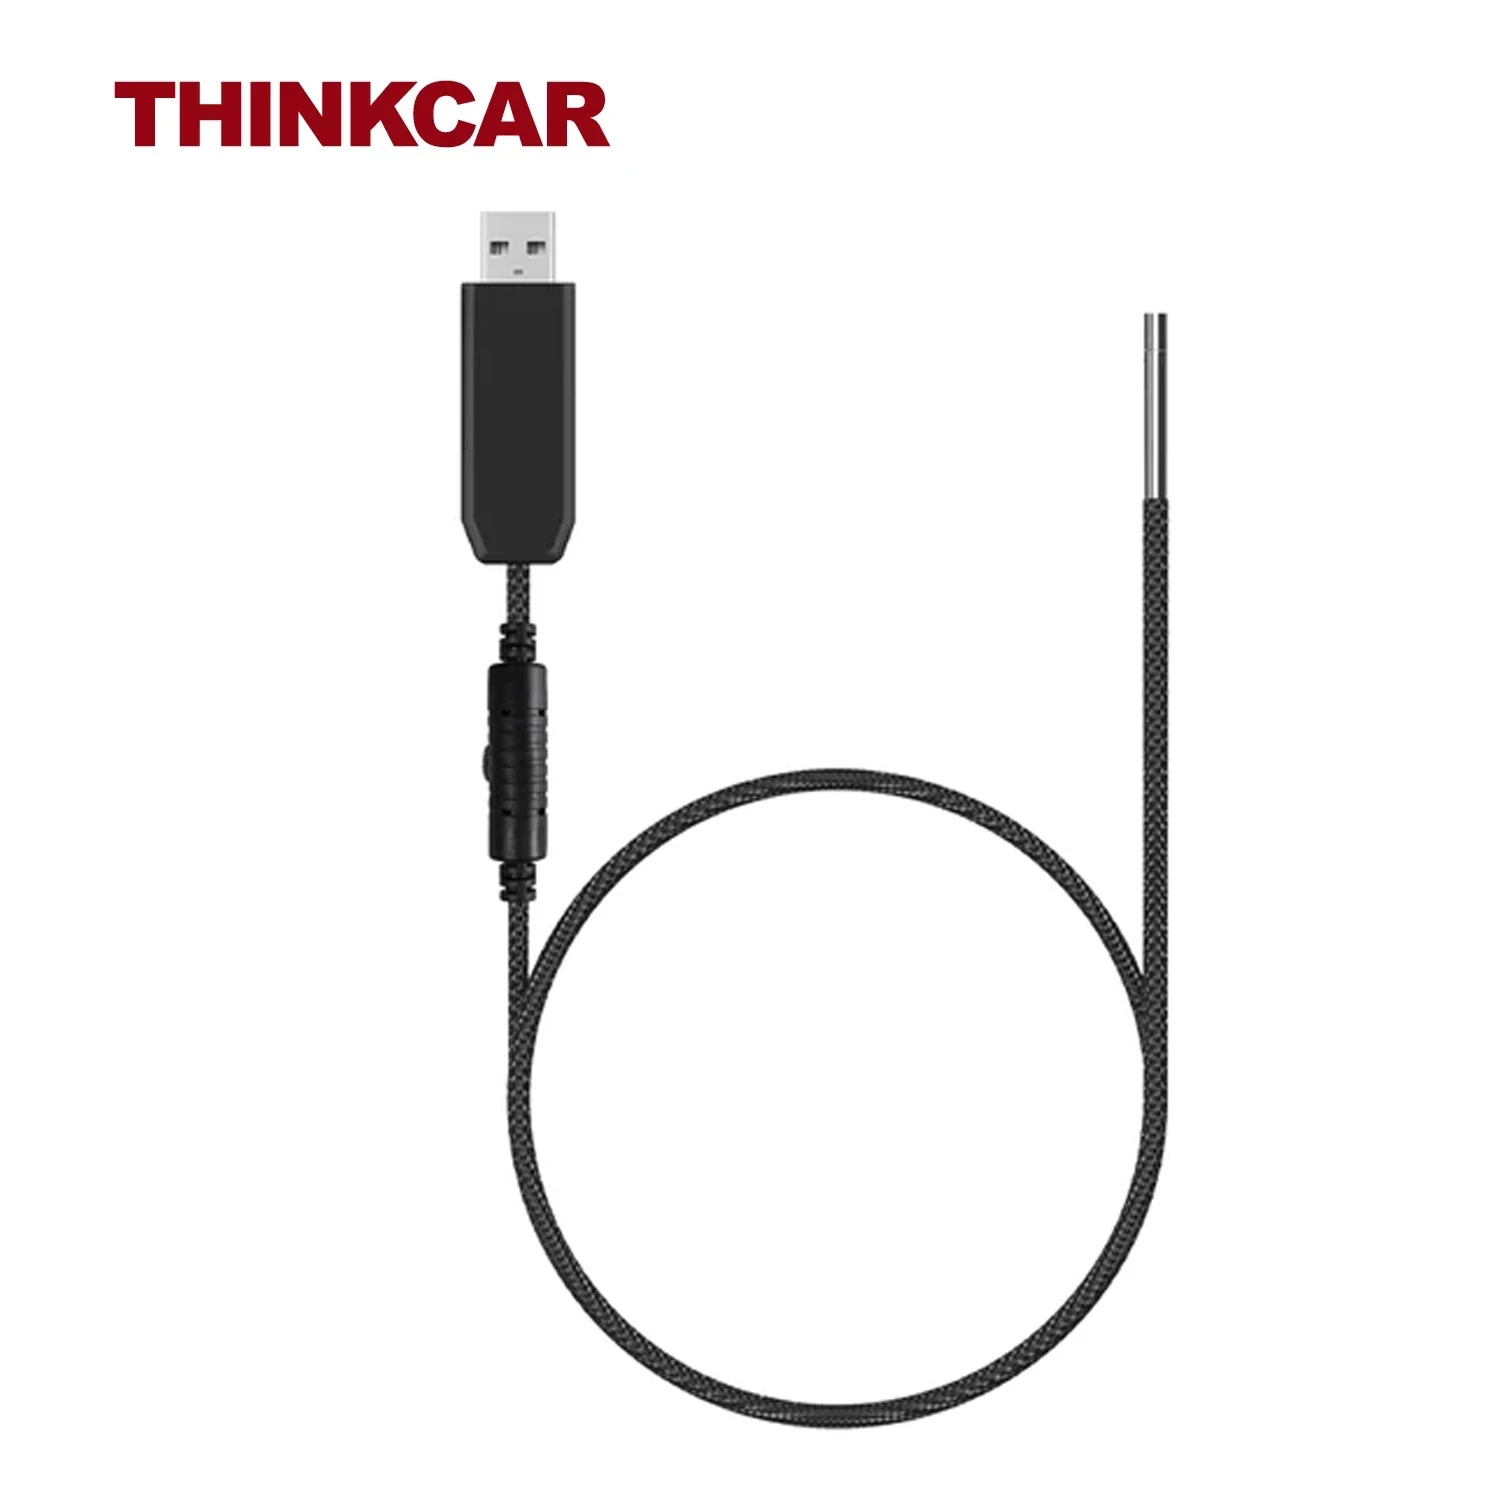 

ThinkCar ThinkTool Video Scope 60 inch USB Video Inspection Scope Camera with LED Light for Automotive Diagnostic Equipment